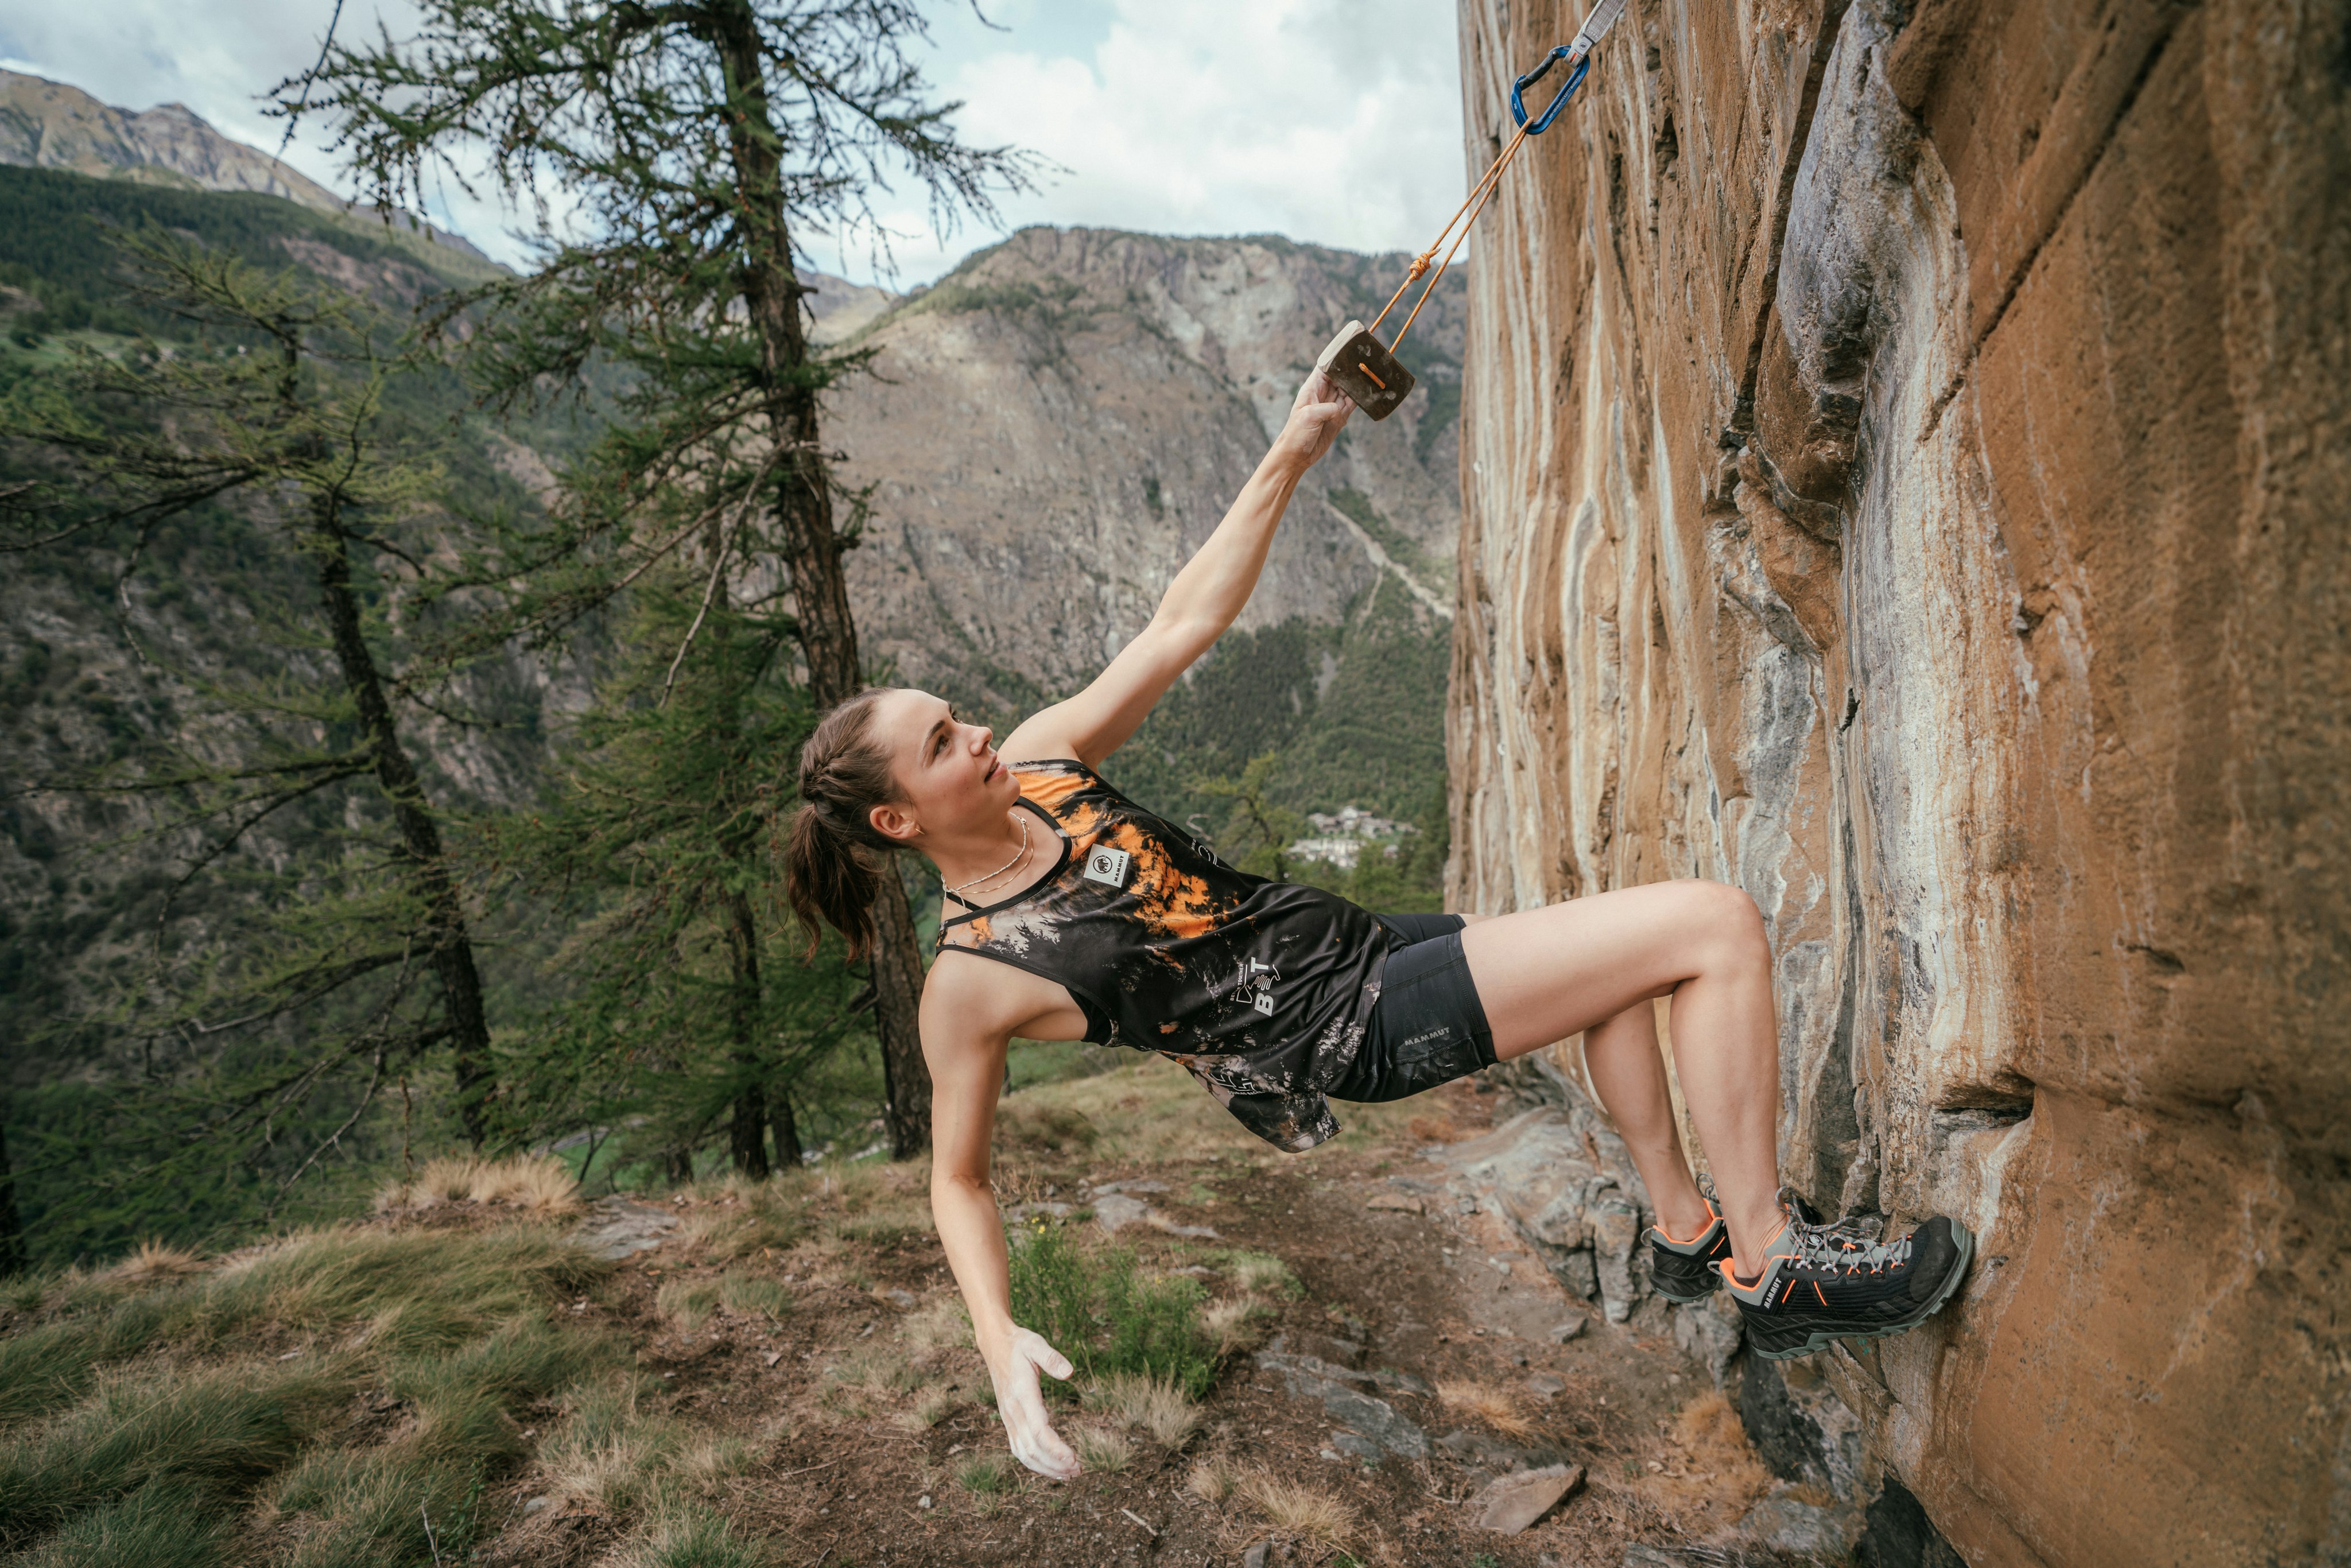 Climbing Pants: How to choose your perfect pair